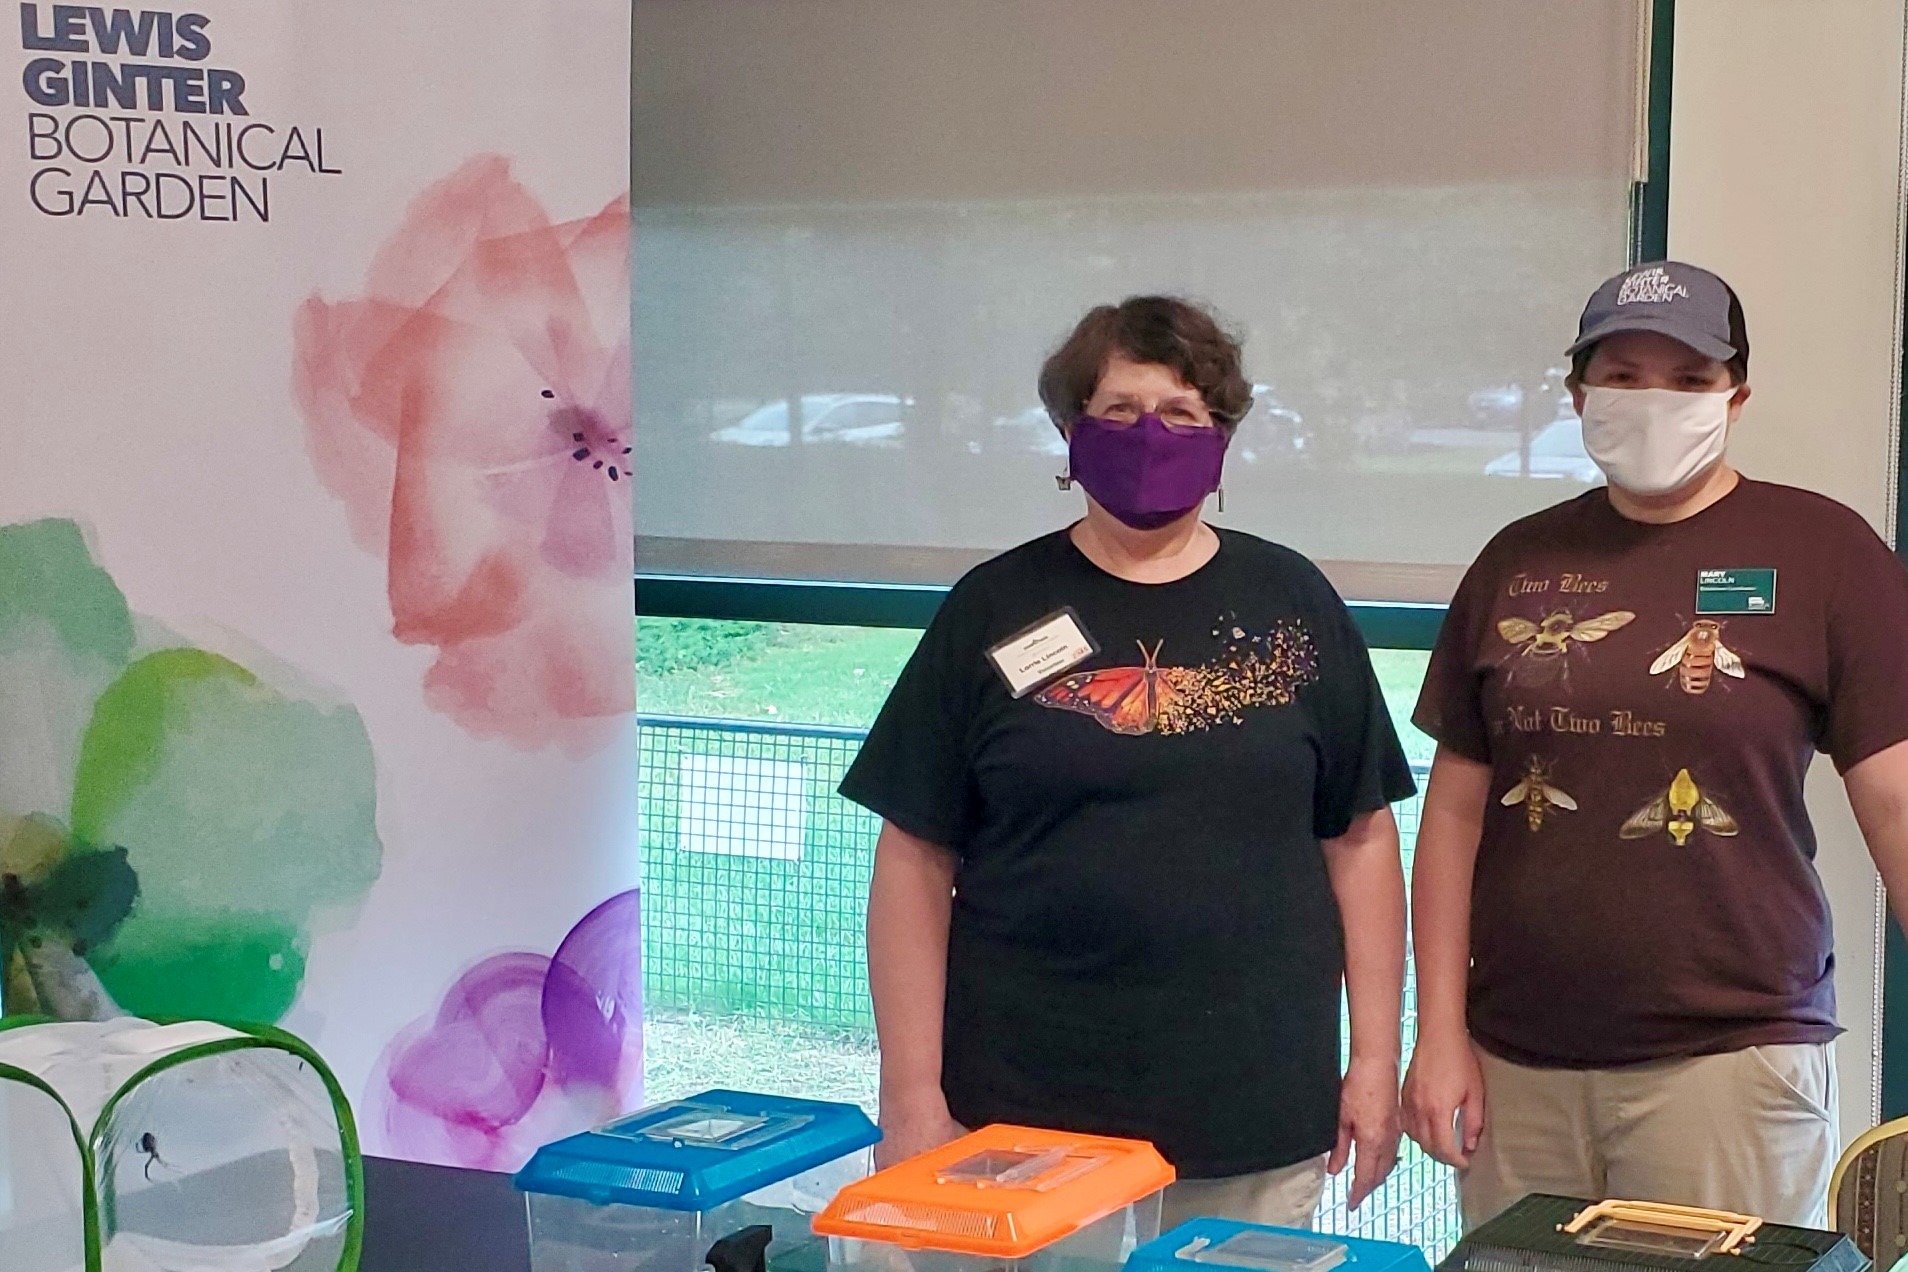 [Garden volunteer Lorrie Lincoln and her daughter Mary Lincoln helped spread the word about the importance of pollinators at Garden and through the community. 